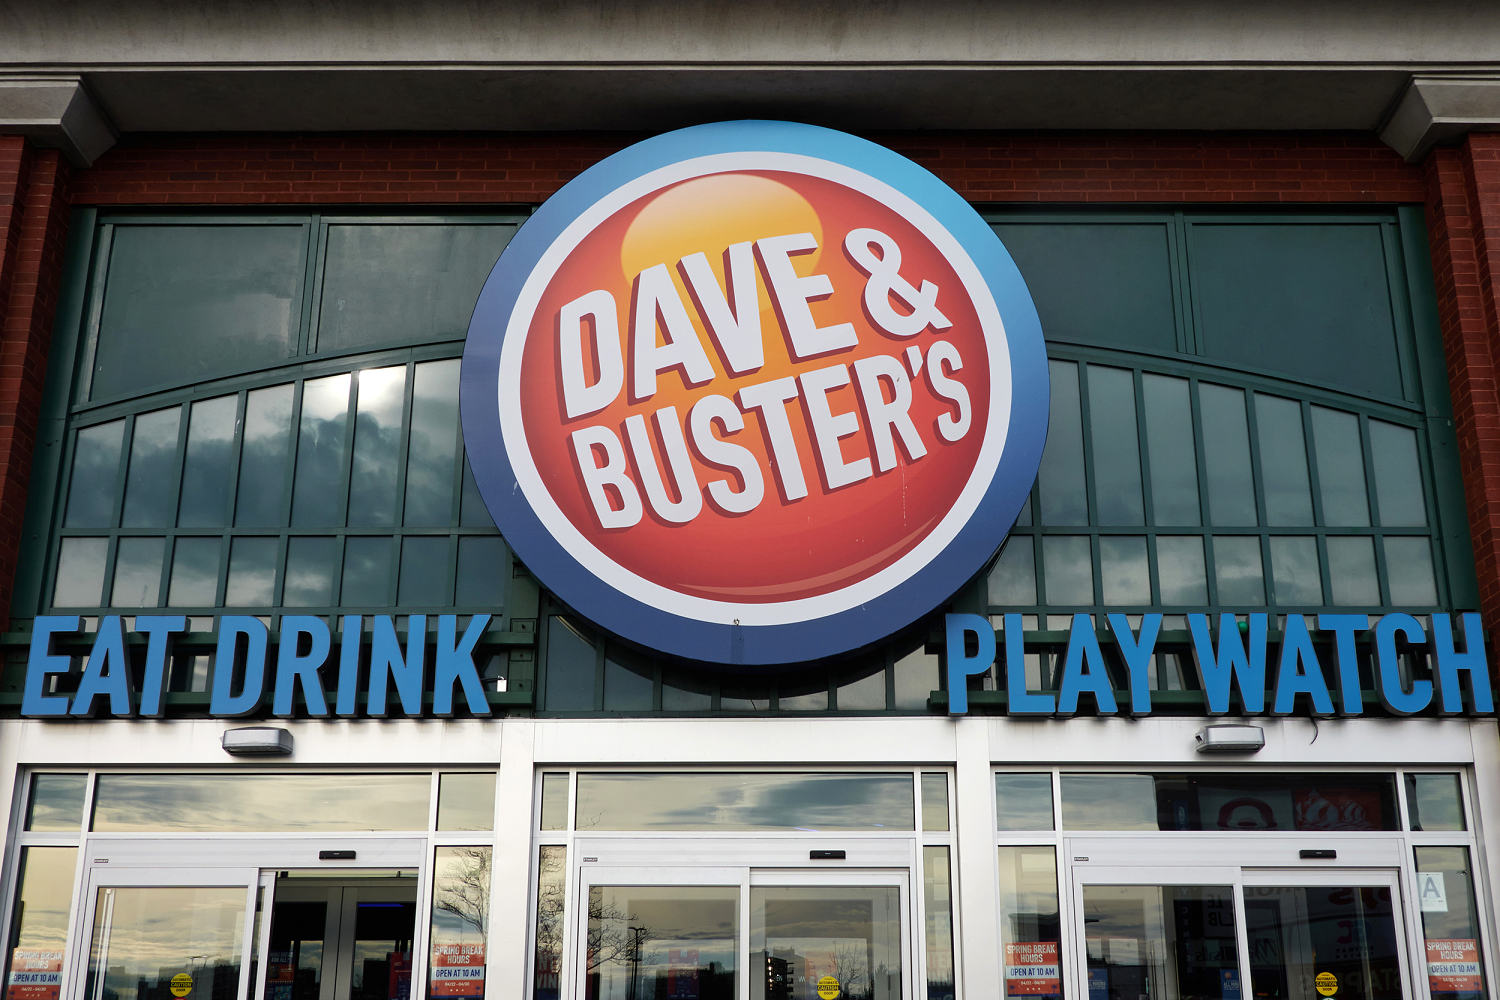 Dave & Buster's plan to allow betting on arcade games draws scrutiny